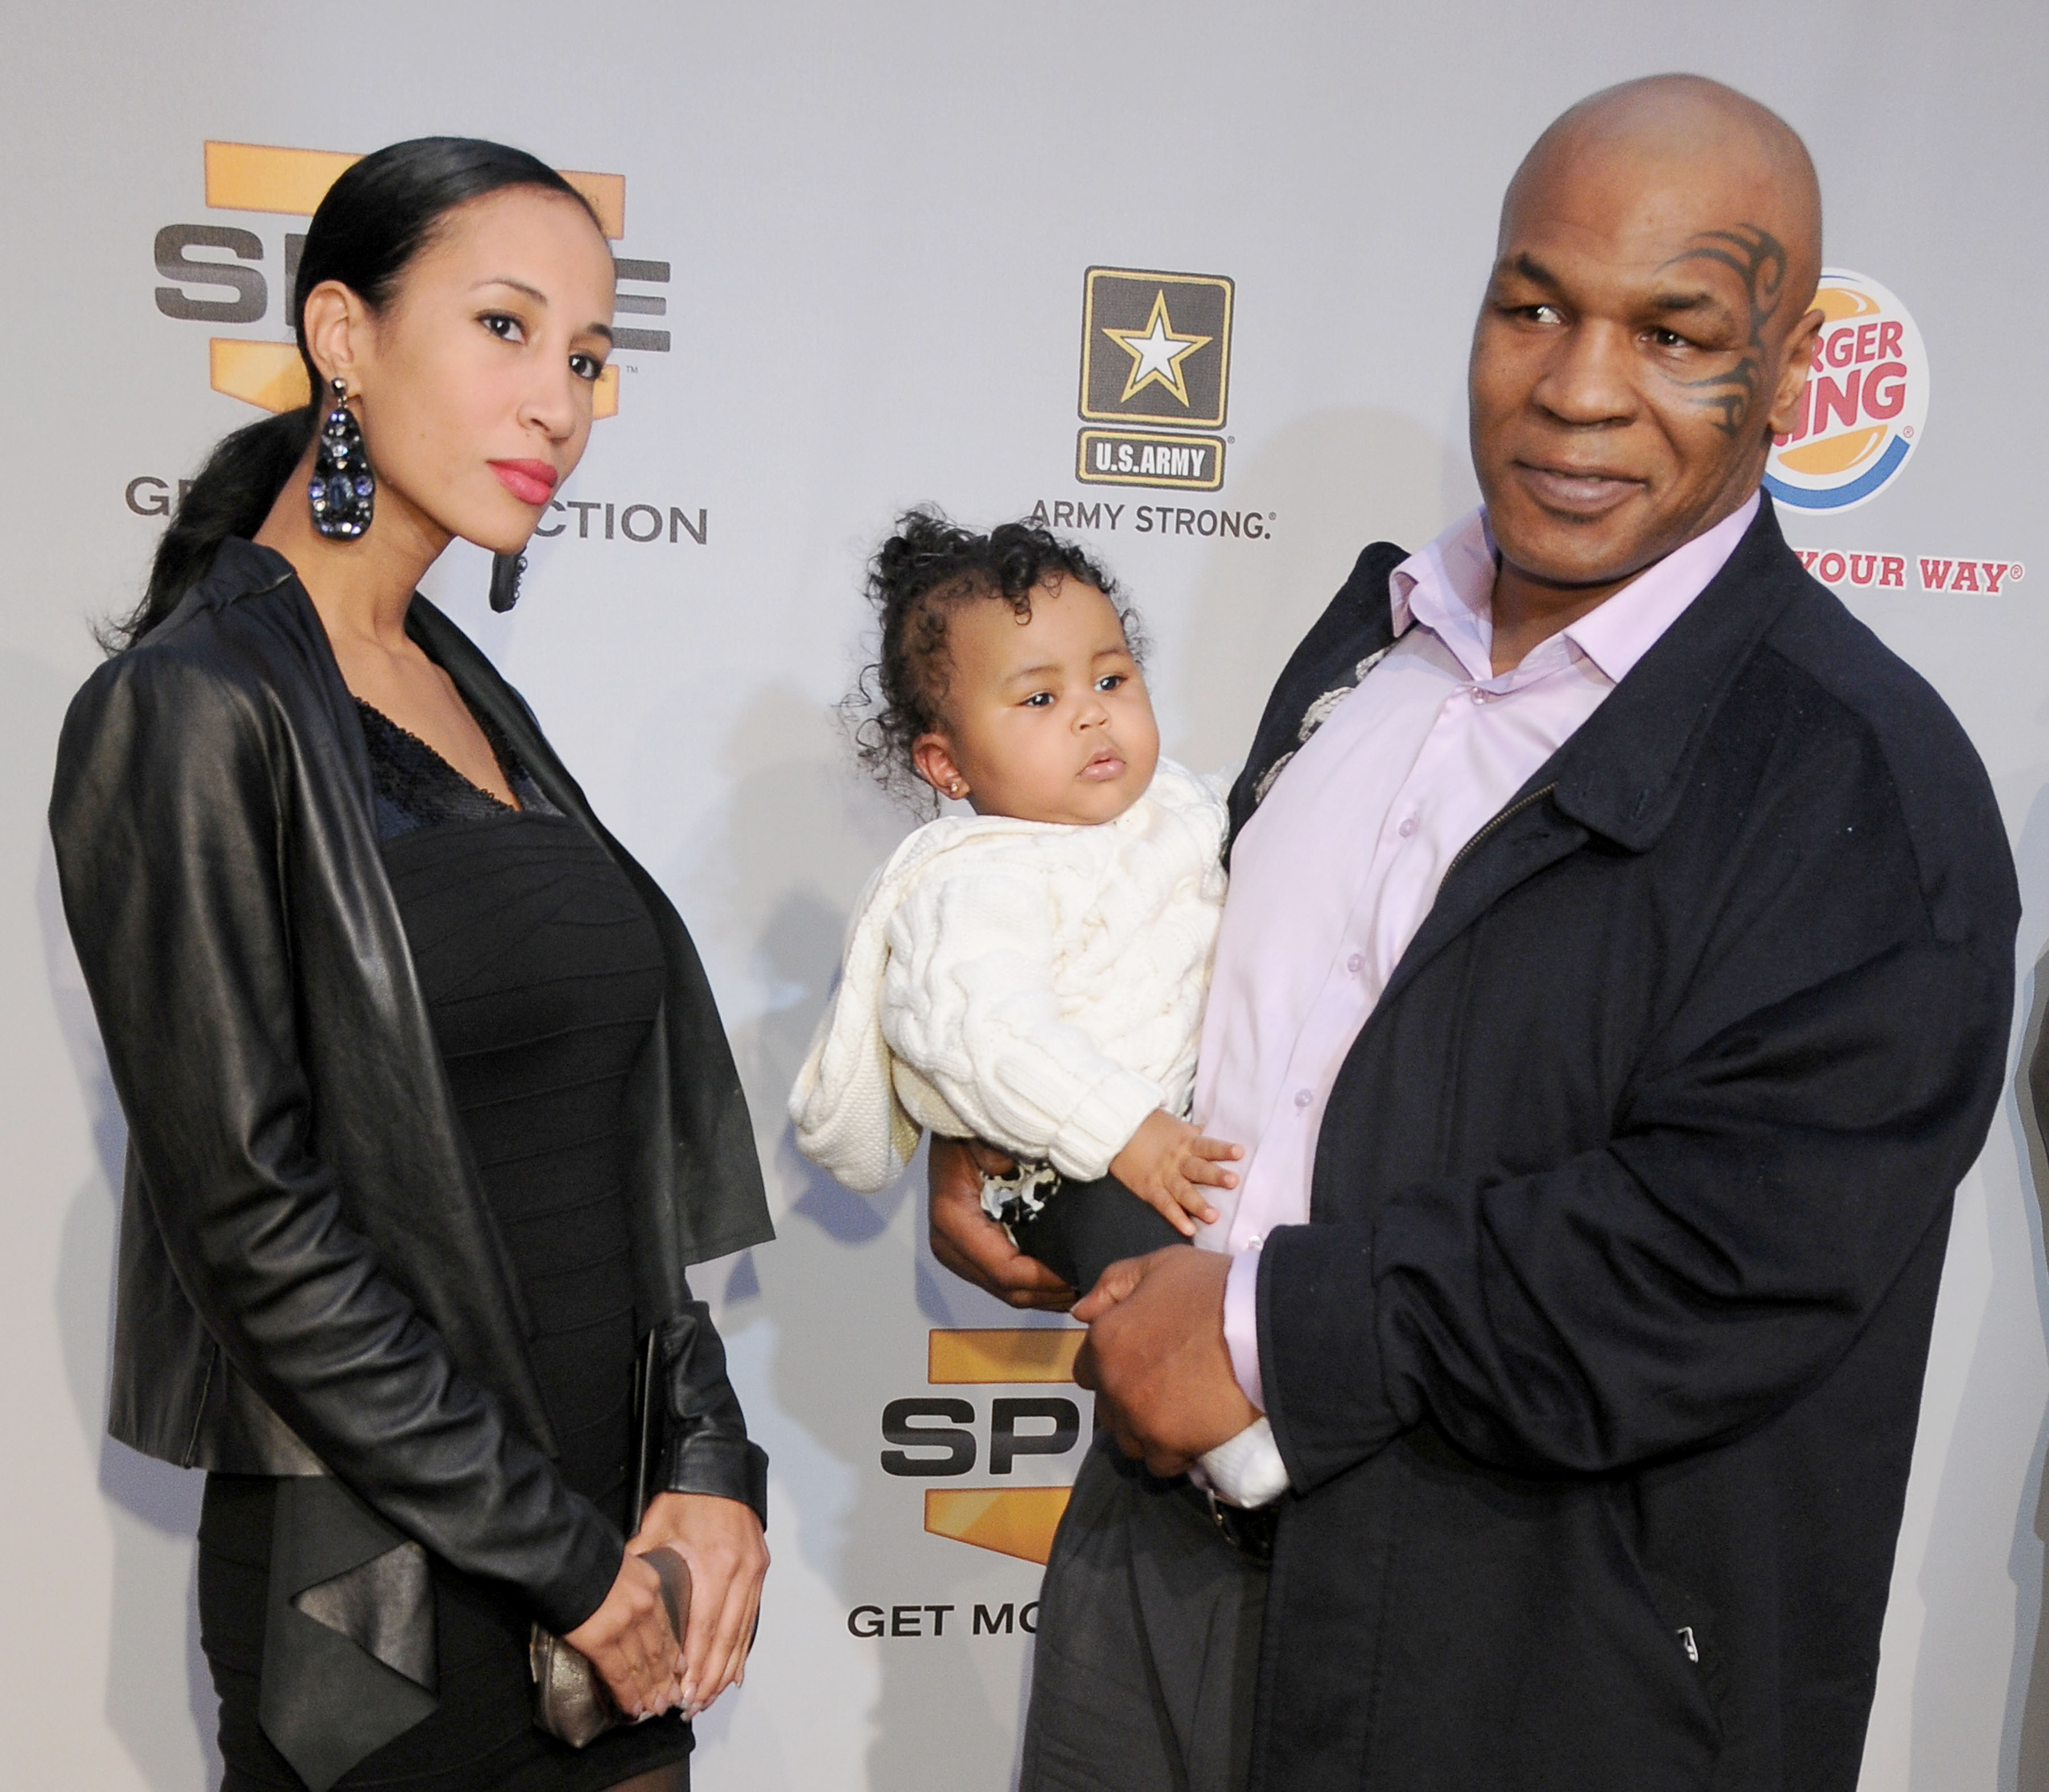 Kiki Tyson, Mike Tyson, and their daughter Milan arriving at Spike TV's Video Game Awards 2009, in Los Angeles, California, on December 12, 2009 | Source: Getty Images